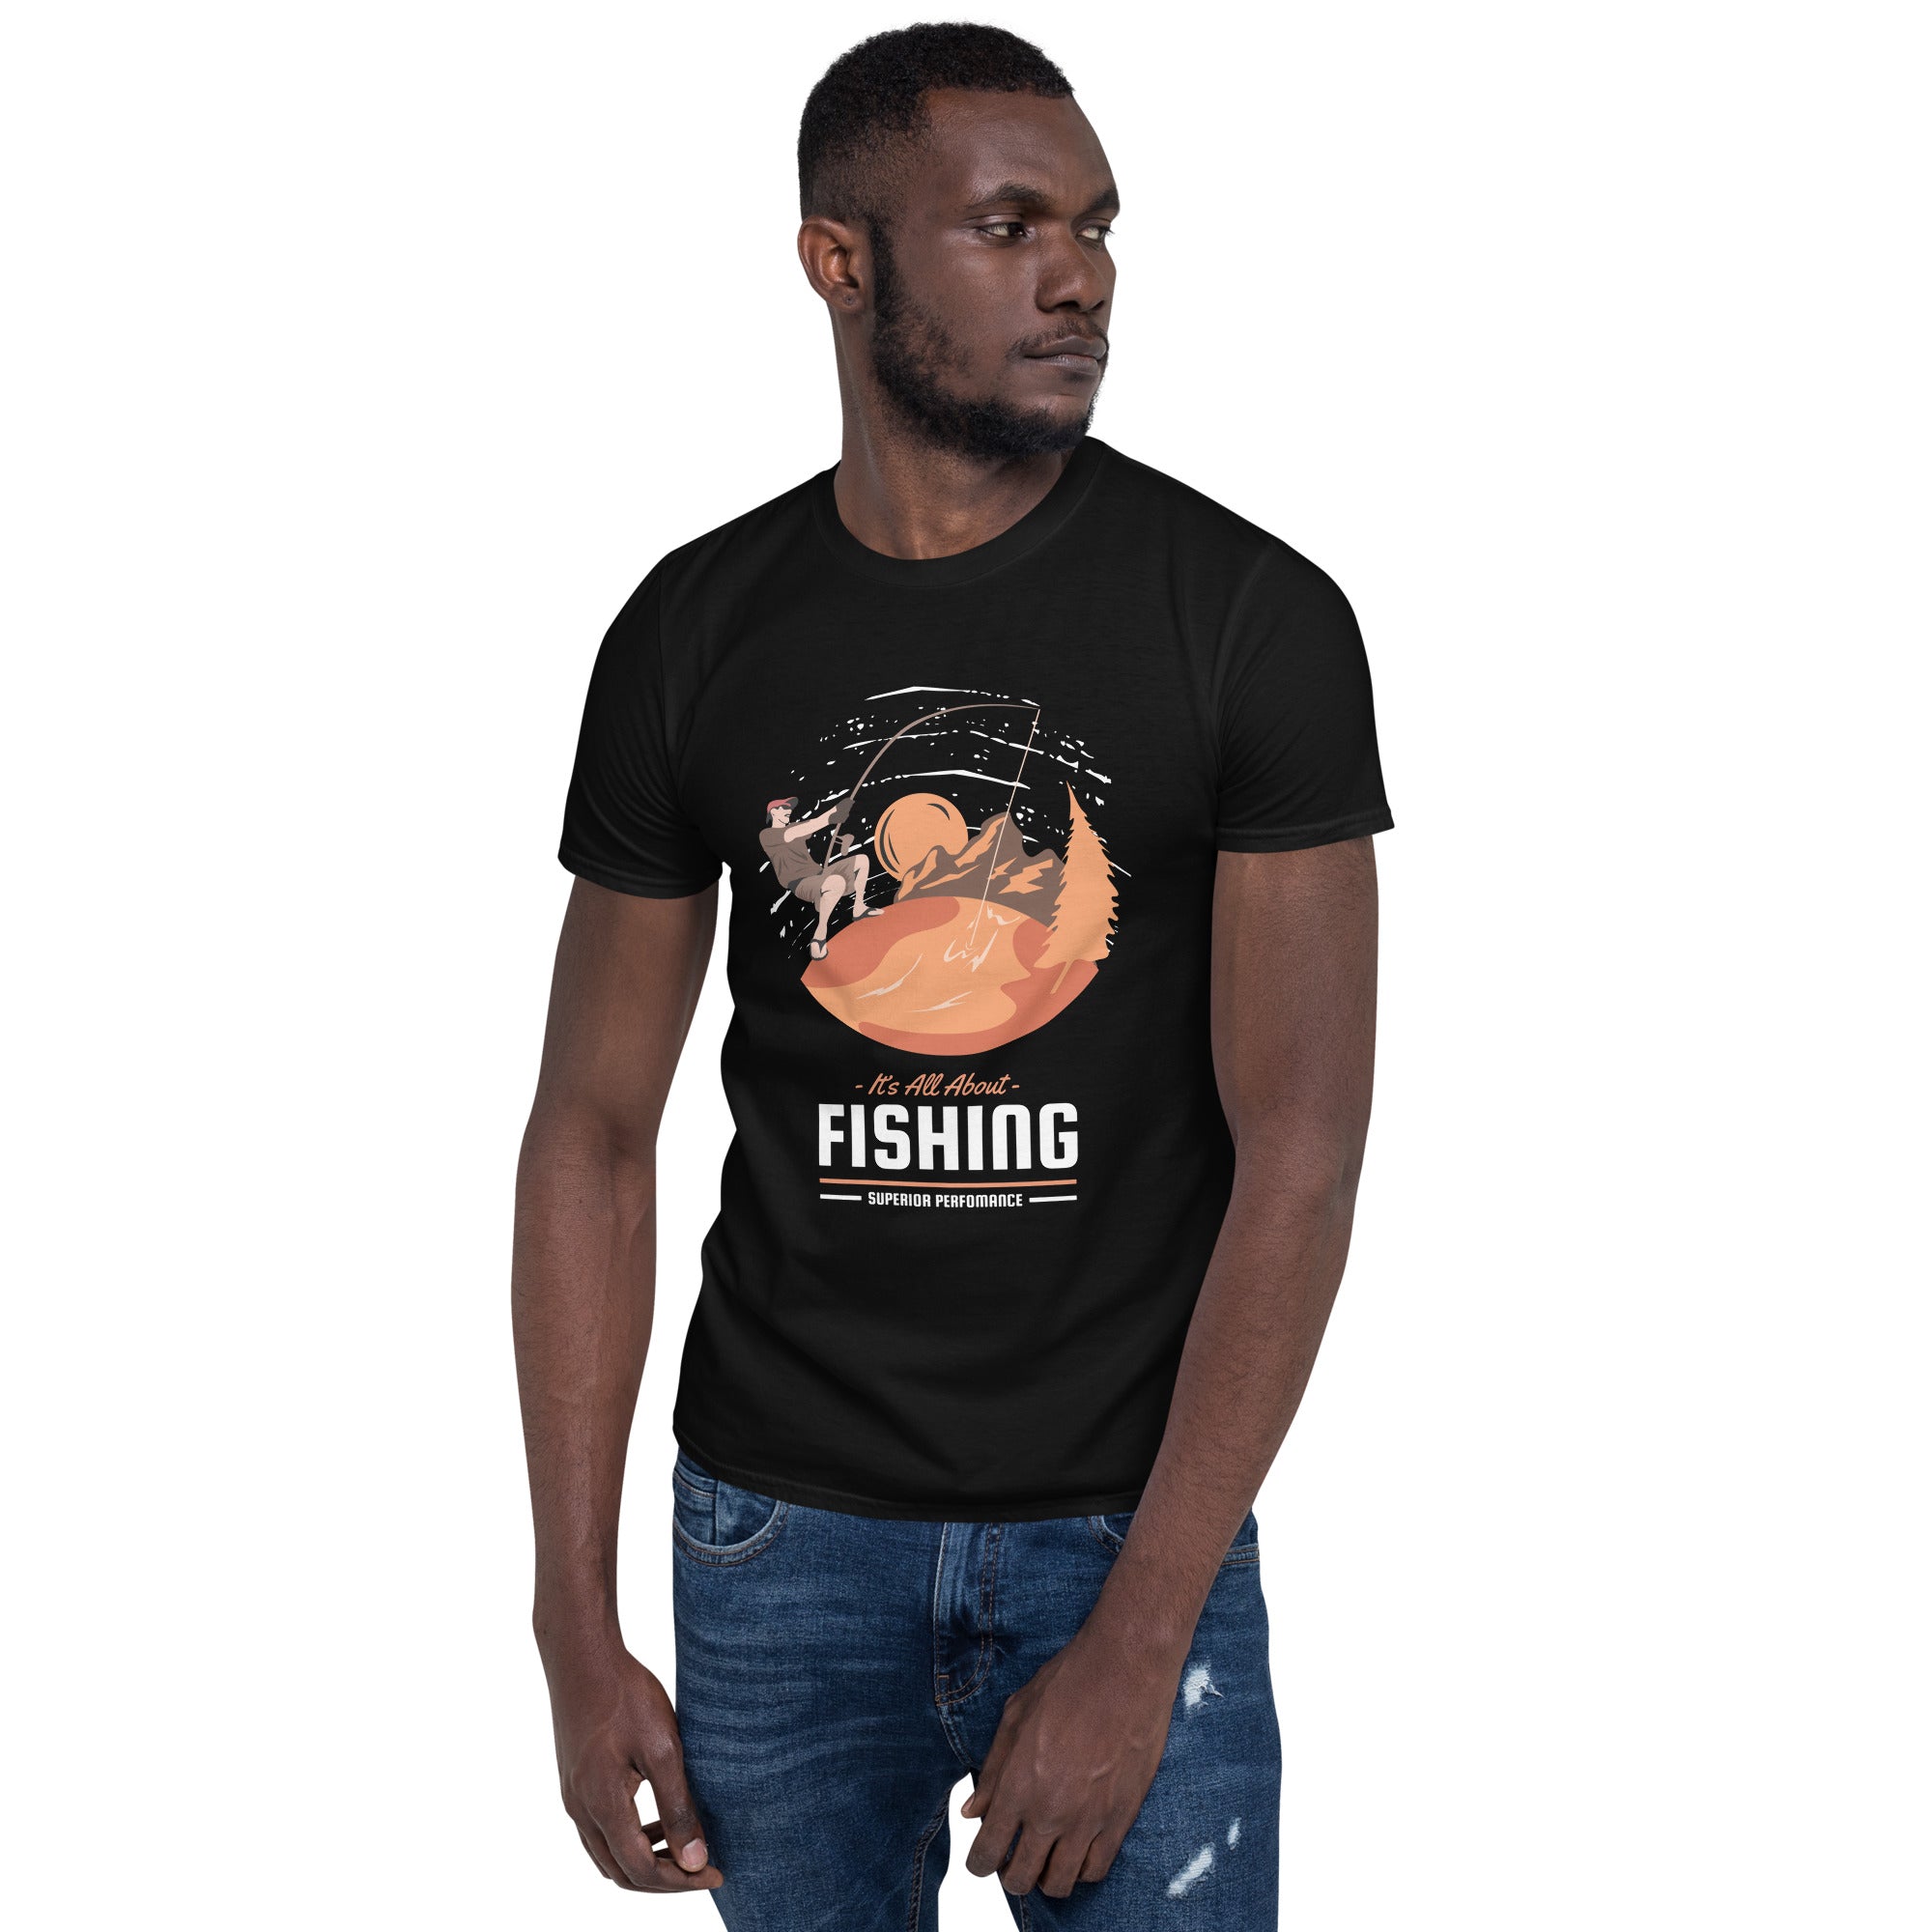 All About Fishing - Short-Sleeve Unisex T-Shirt